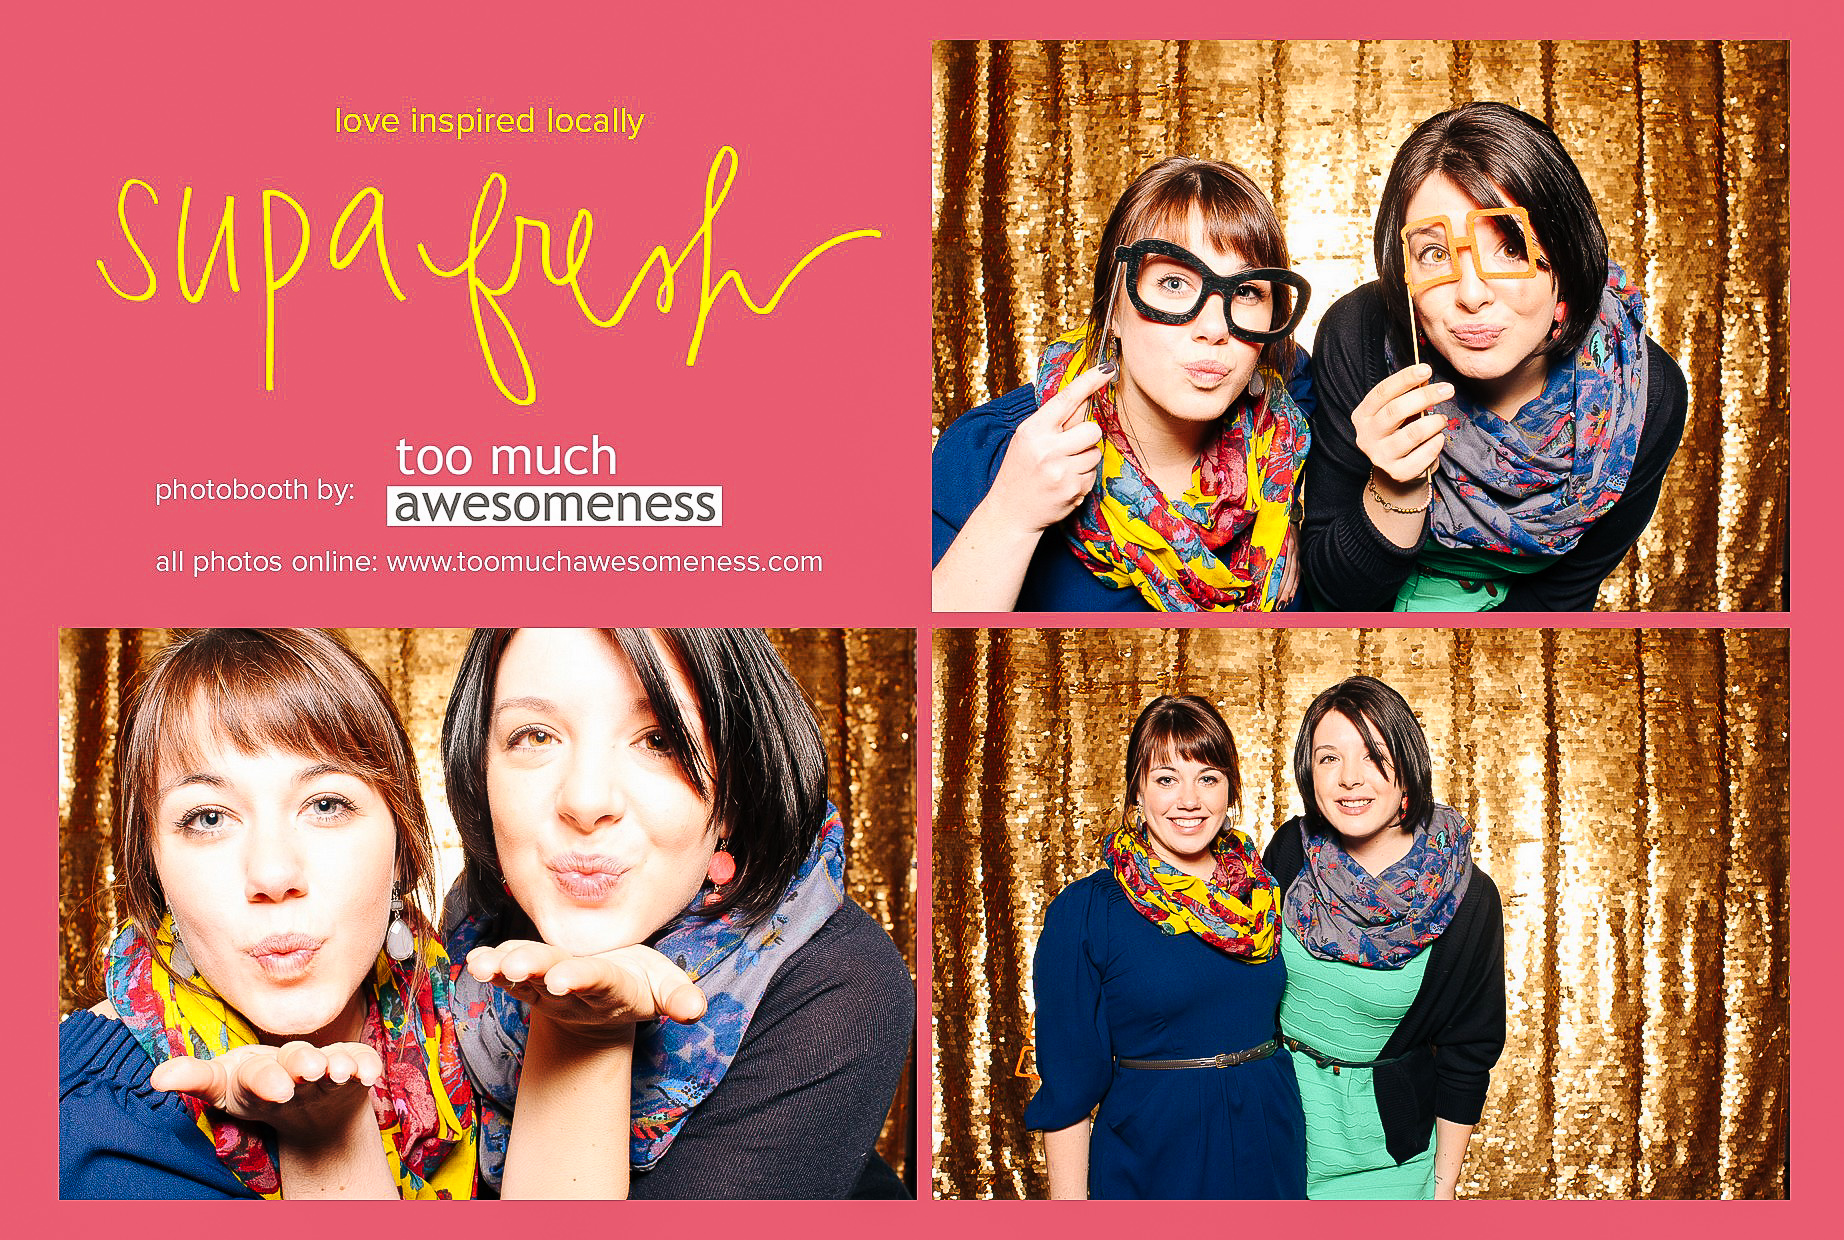 00252-Open Air Photobooth in Cleveland - Too Much Awesomeness.jpg